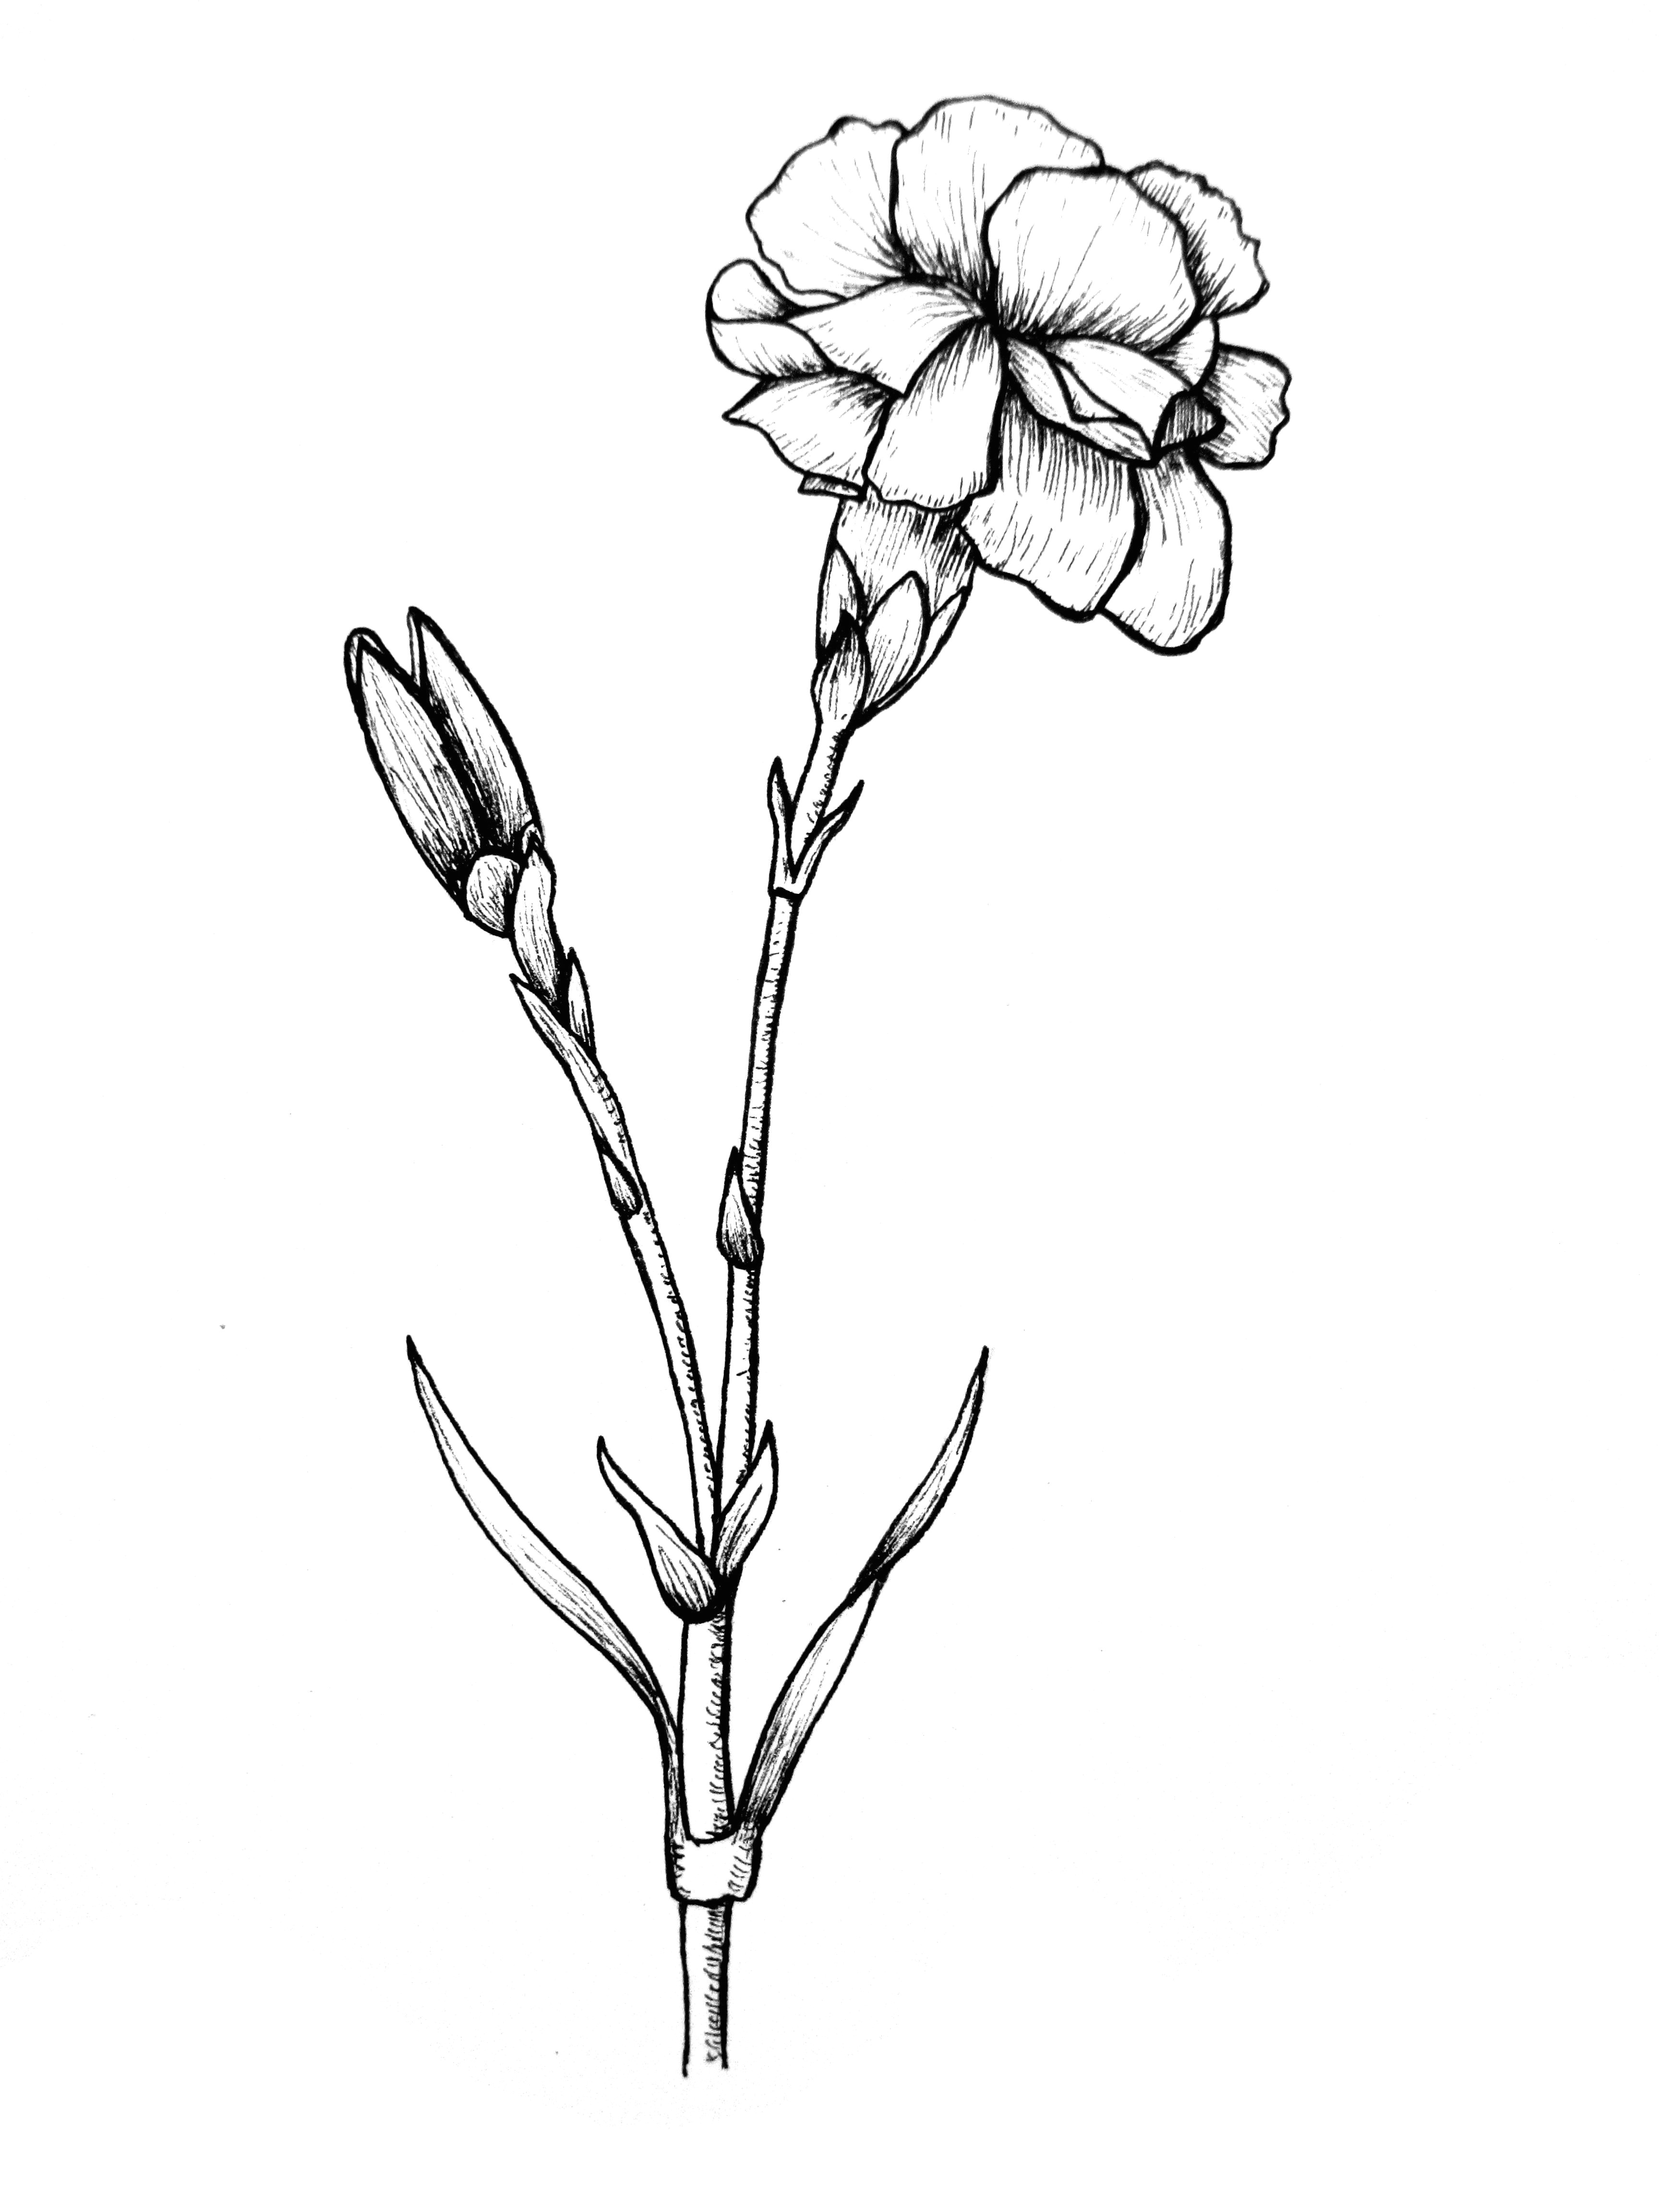 Easy Pencil Drawings Of Flowers and Vines Awesome Pencil Drawings Of Flowers and Vines Www Pantry Magic Com